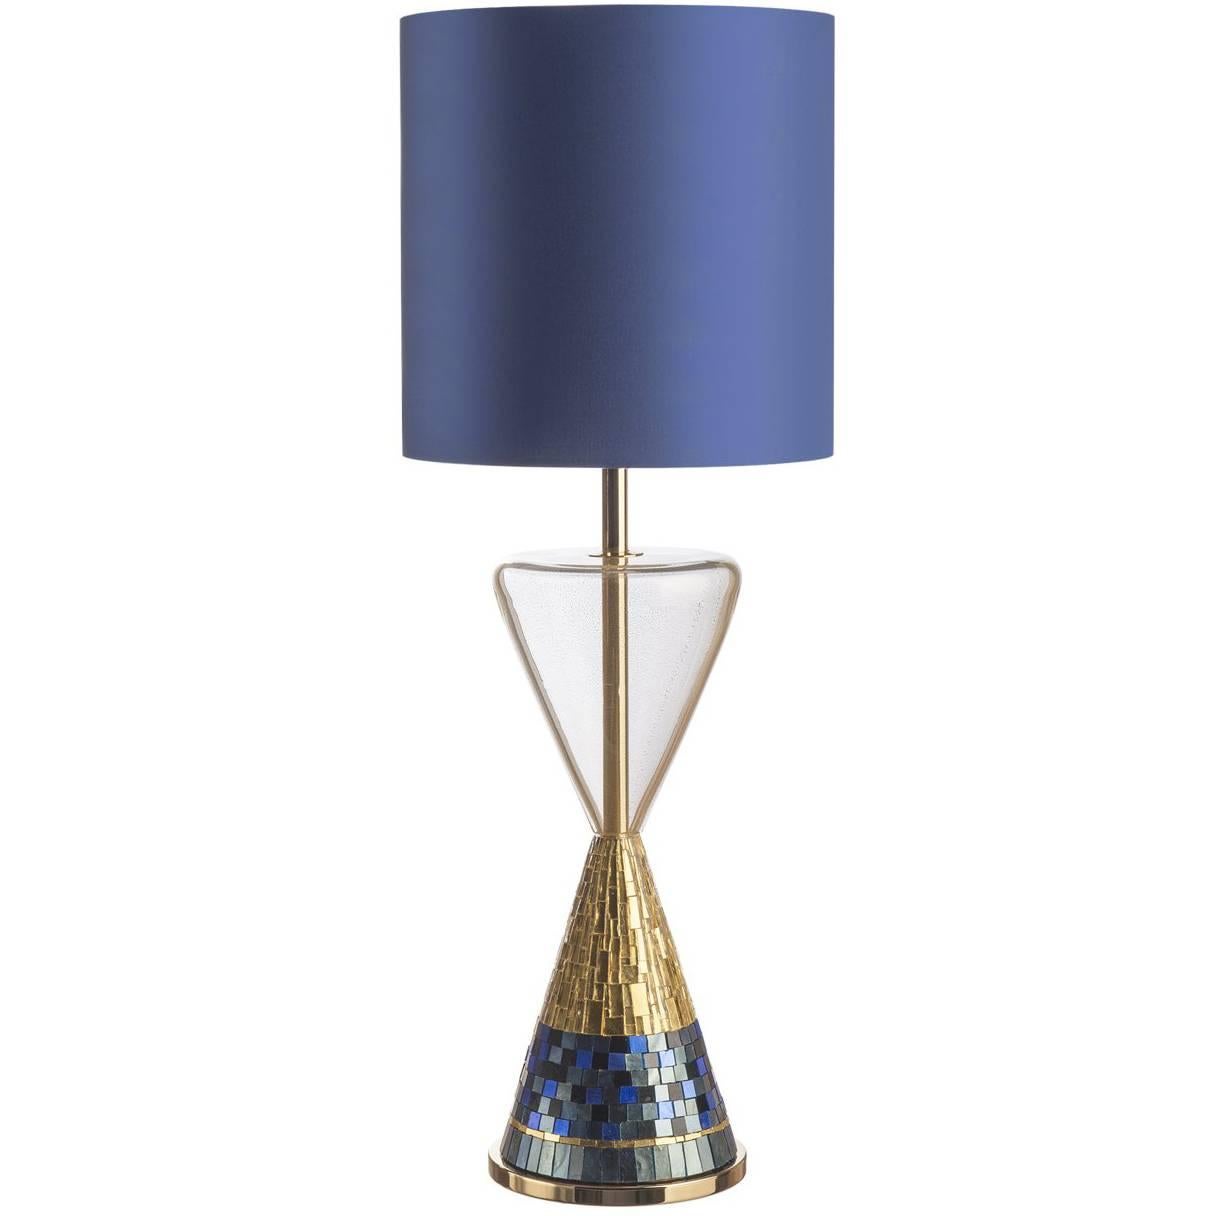 Tempo Table Lamp